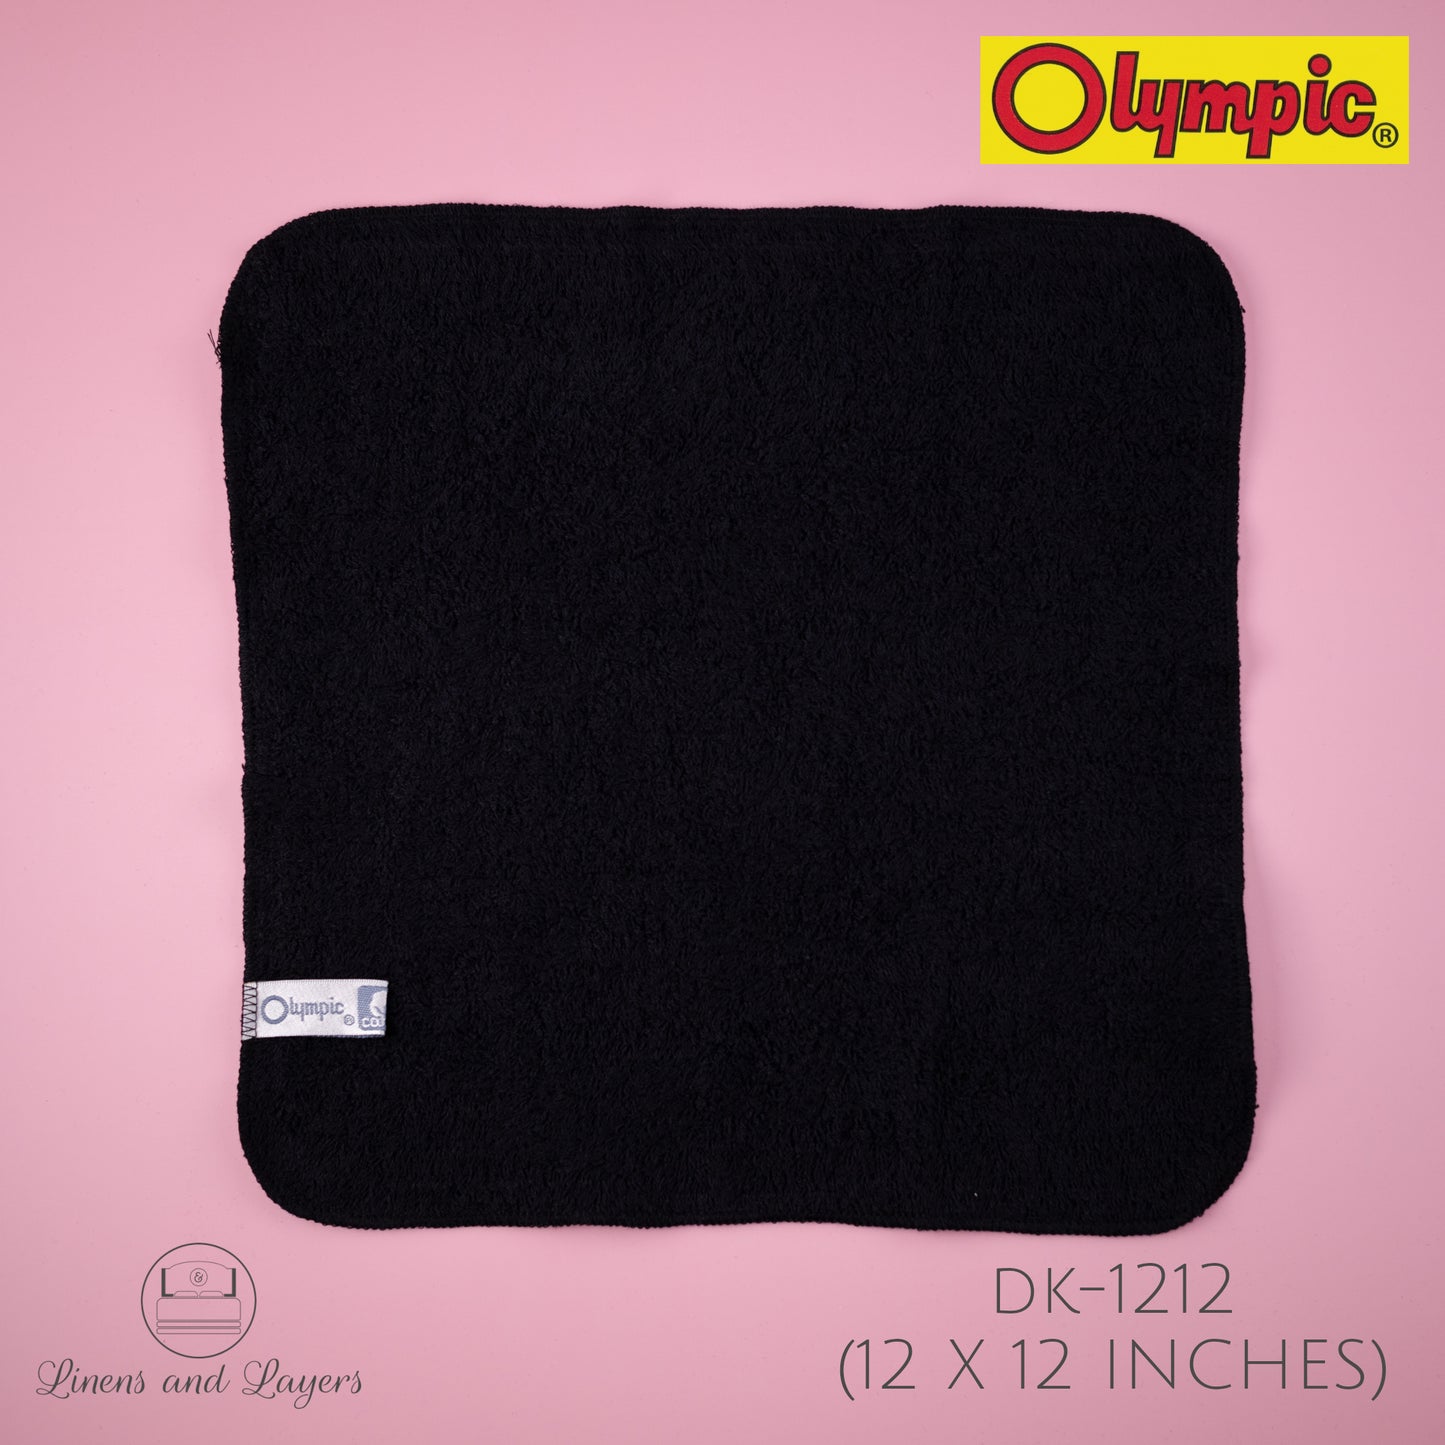 Olympic Black Face Towel / Salon Towel / Spa Towel  (430 GSM) -  DK-1212  Terrycloth - 12x12 inches